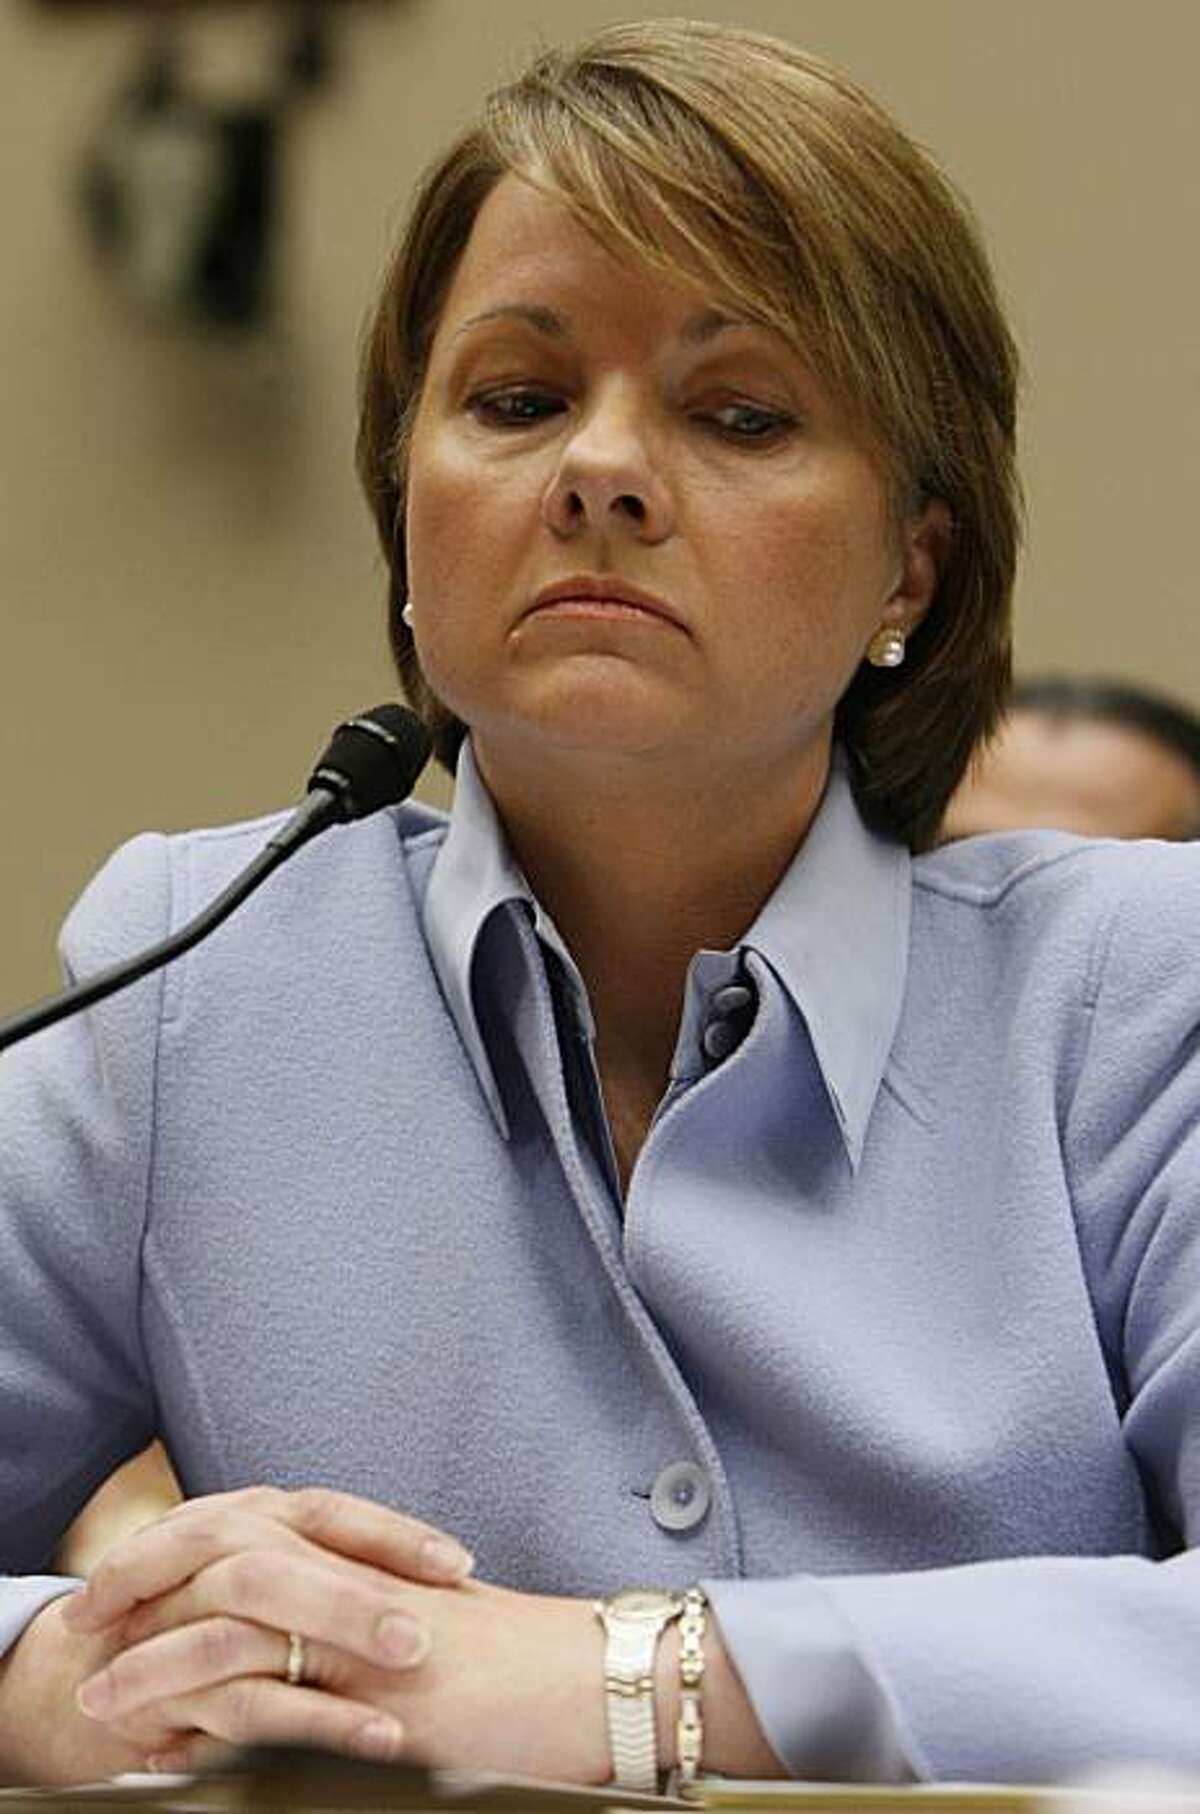 CORRECTS LAST NAME OF CEO ** Angela Braly, president and chief executive officer of WellPoint, Inc., testifies on Capitol Hill in Washington, Wednesday, Feb. 24, 2010, before the House Oversight and Investigations subcommittee hearing on "Premium Increases by Anthem Blue Cross in the Individual Health Insurance Market."